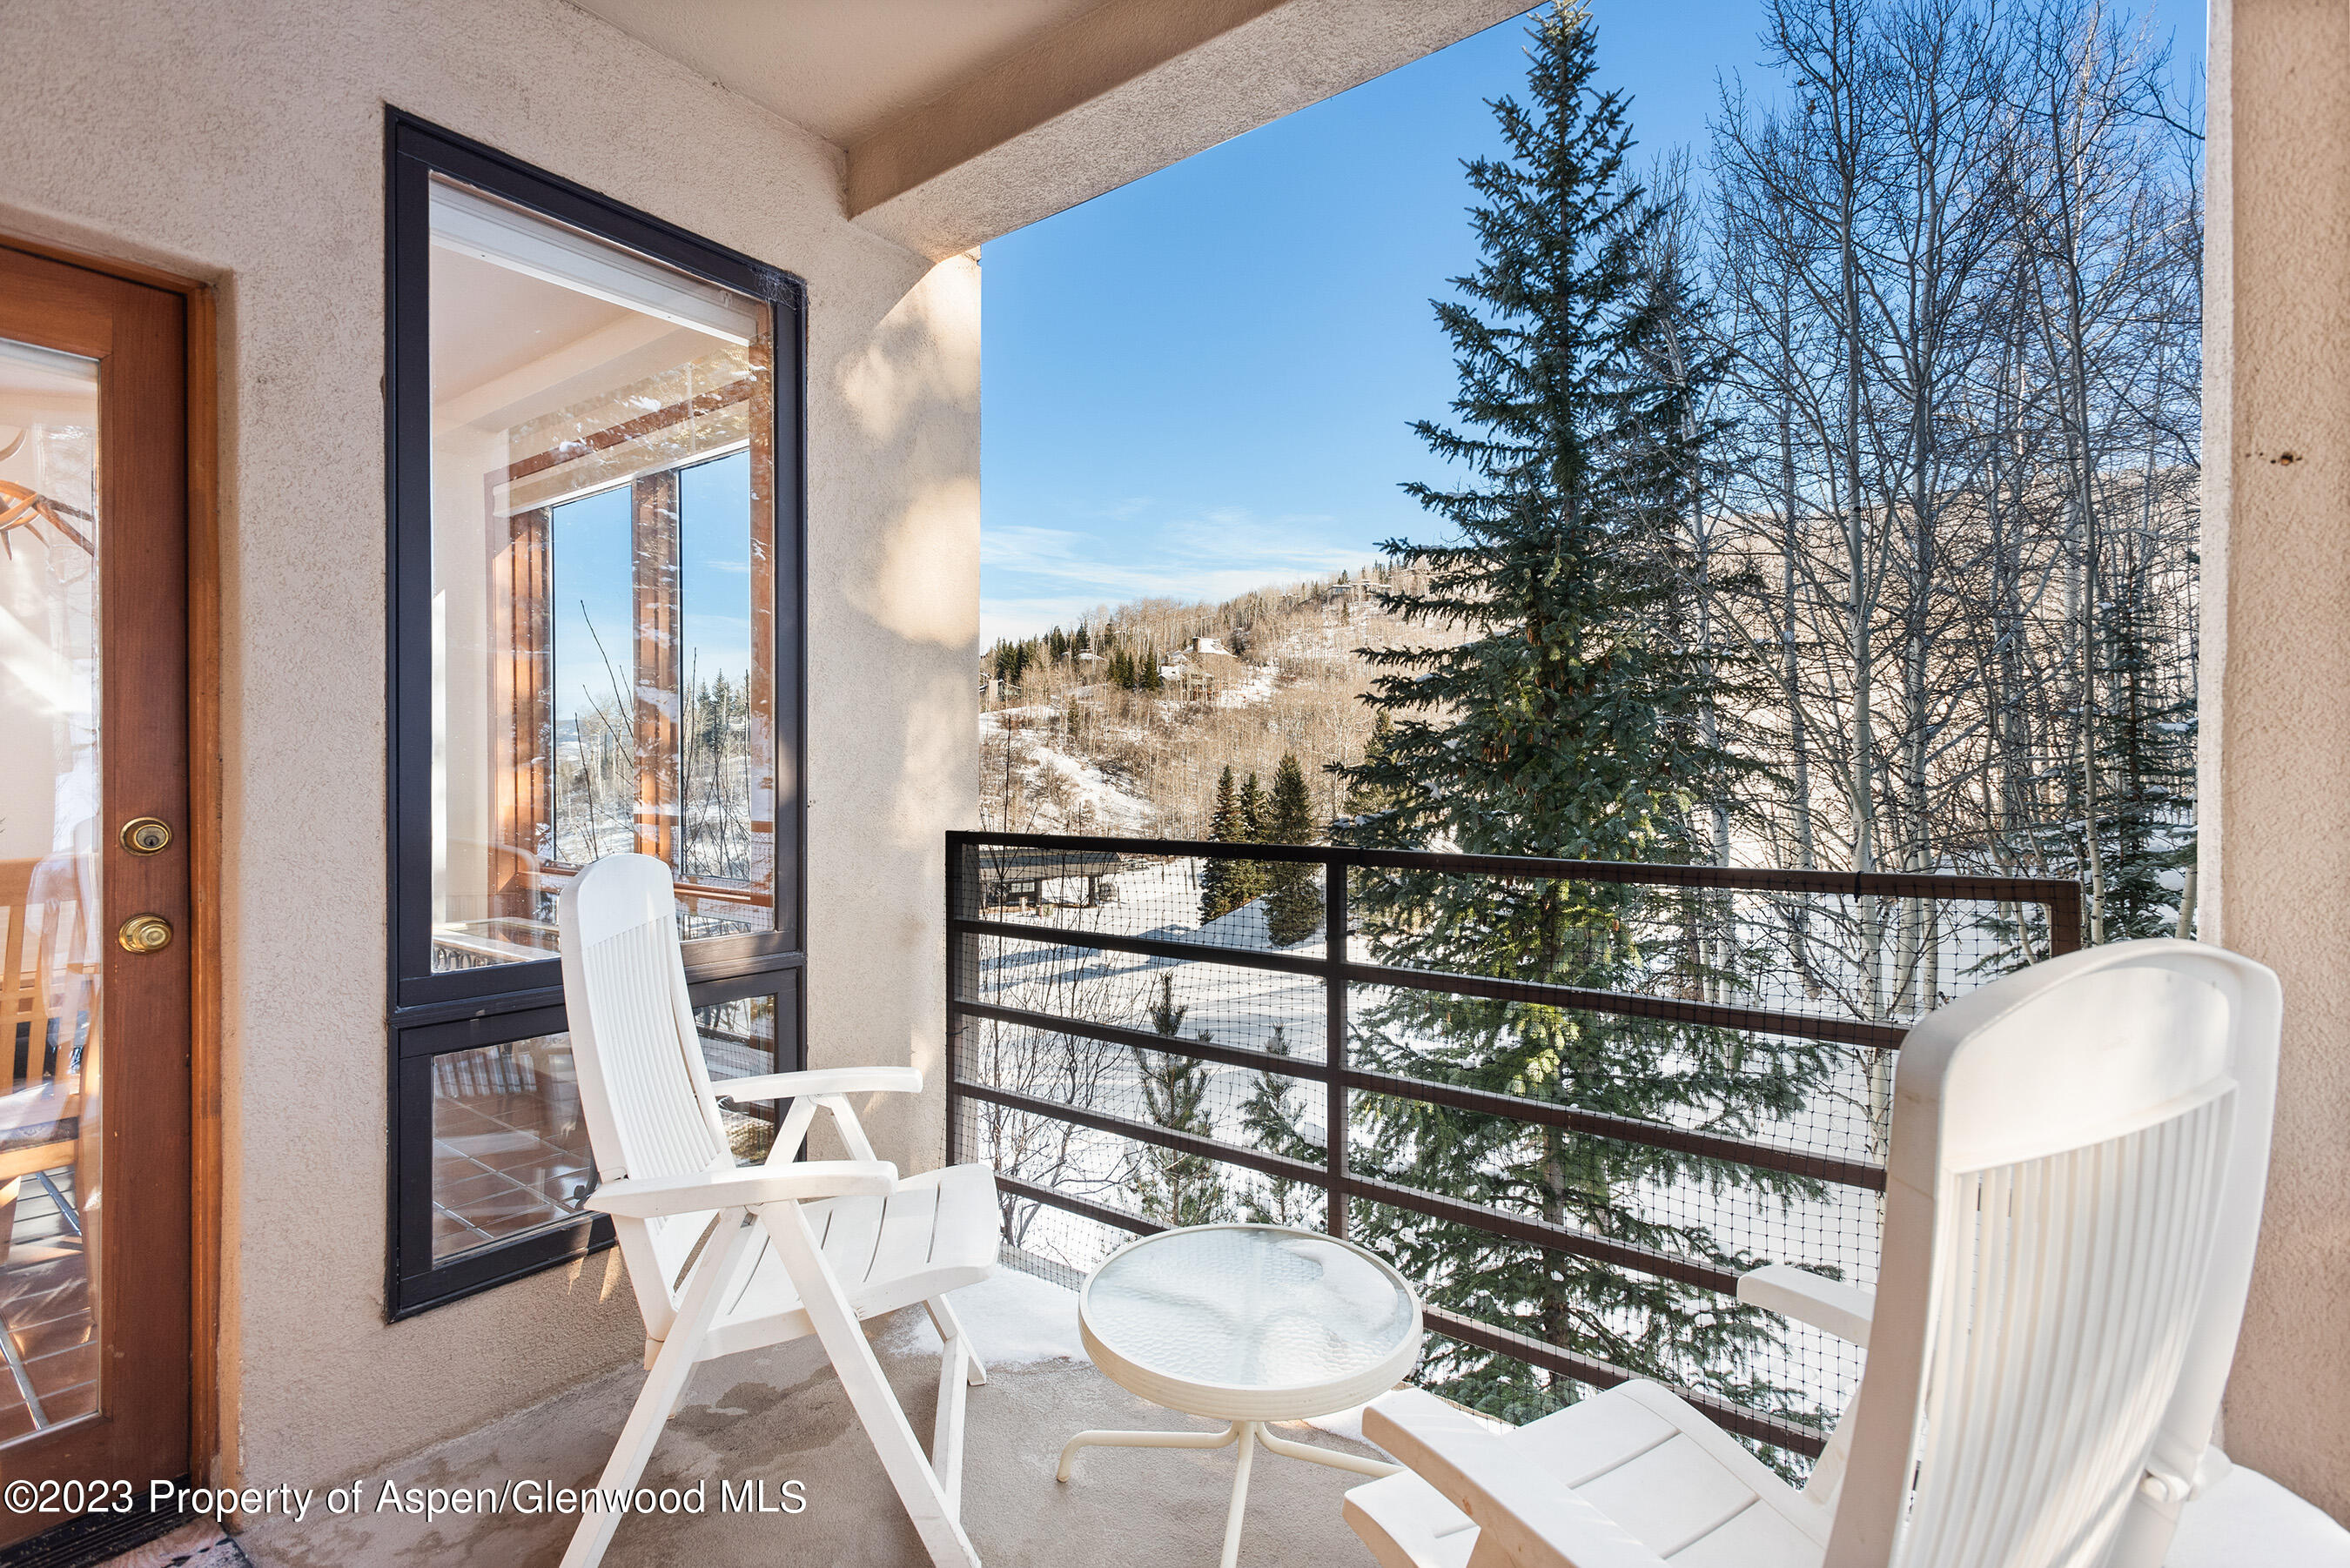 476 Wood Road, Snowmass Village, Colorado, 81615, United States, 2 Bedrooms Bedrooms, ,2 BathroomsBathrooms,Residential,For Sale,476 Wood Road,1412849